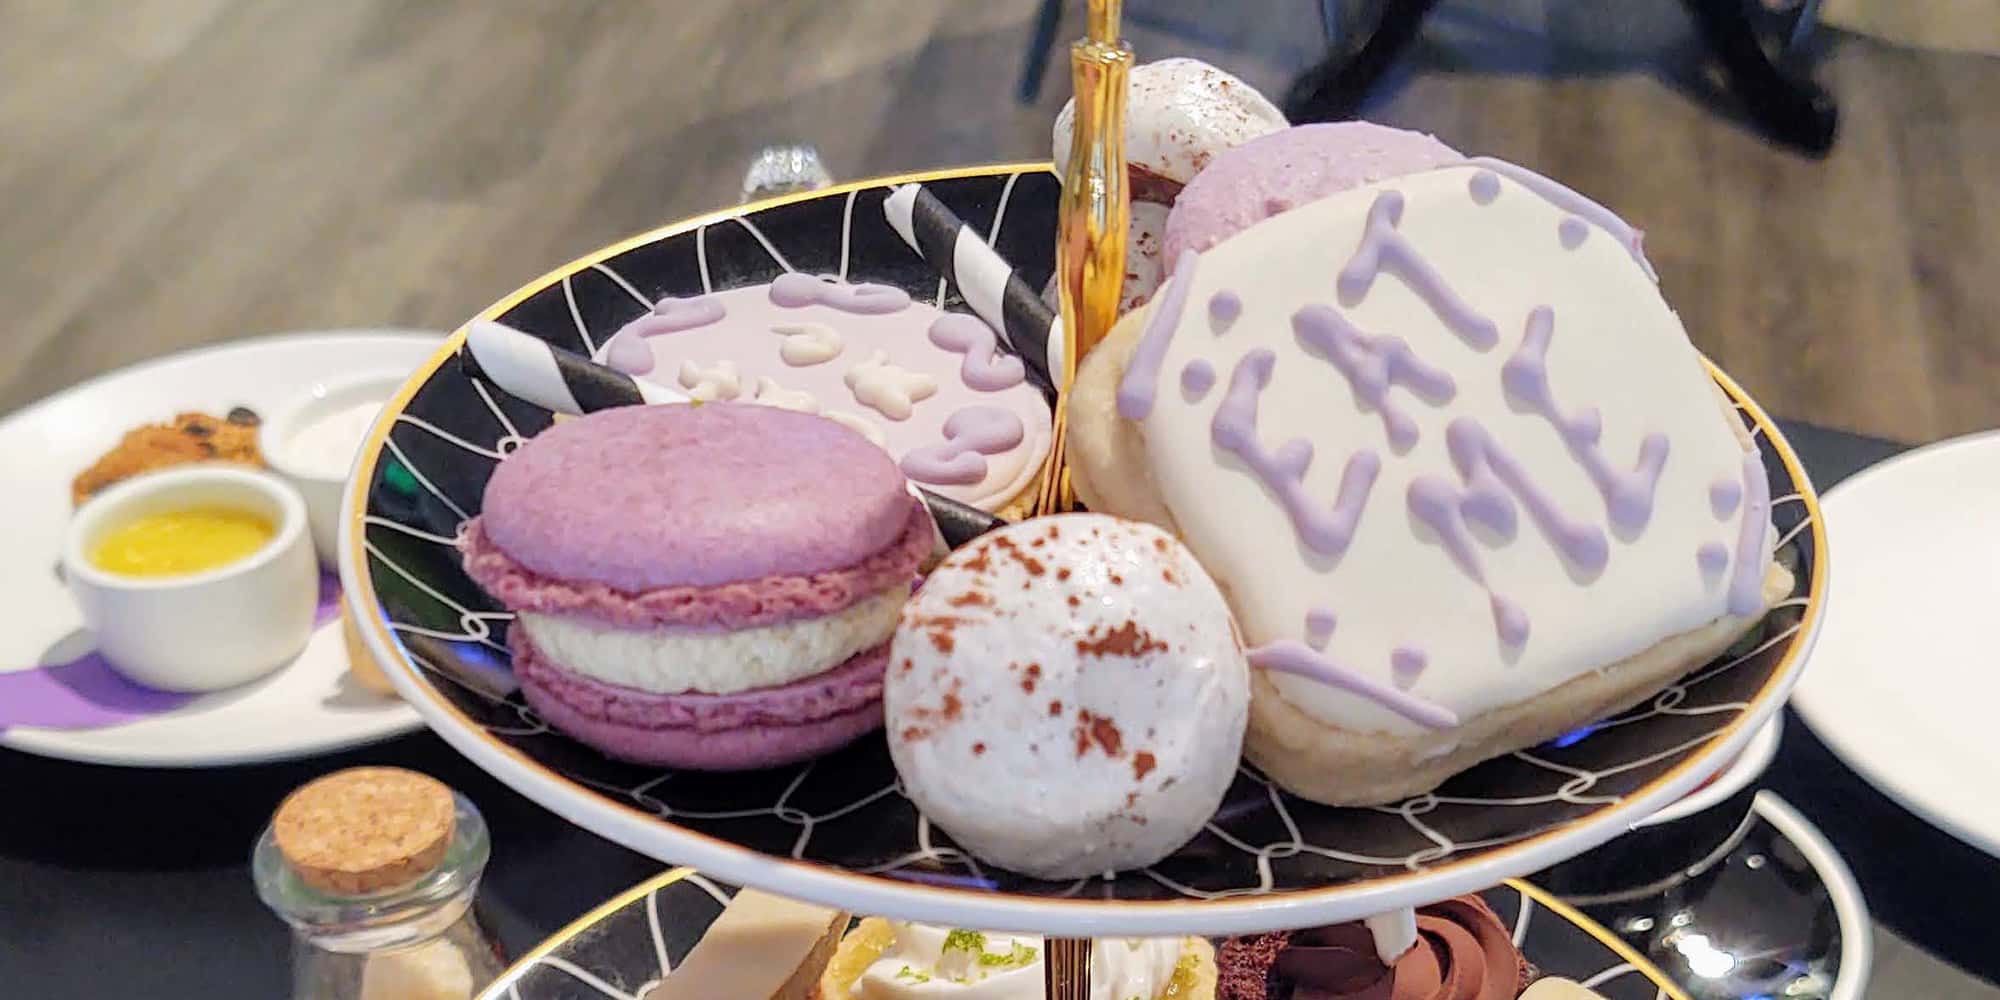 Drink Me! Tea Room Opens in Tempe, AZ Bringing a Modern Twist to the Afternoon Tea Concept